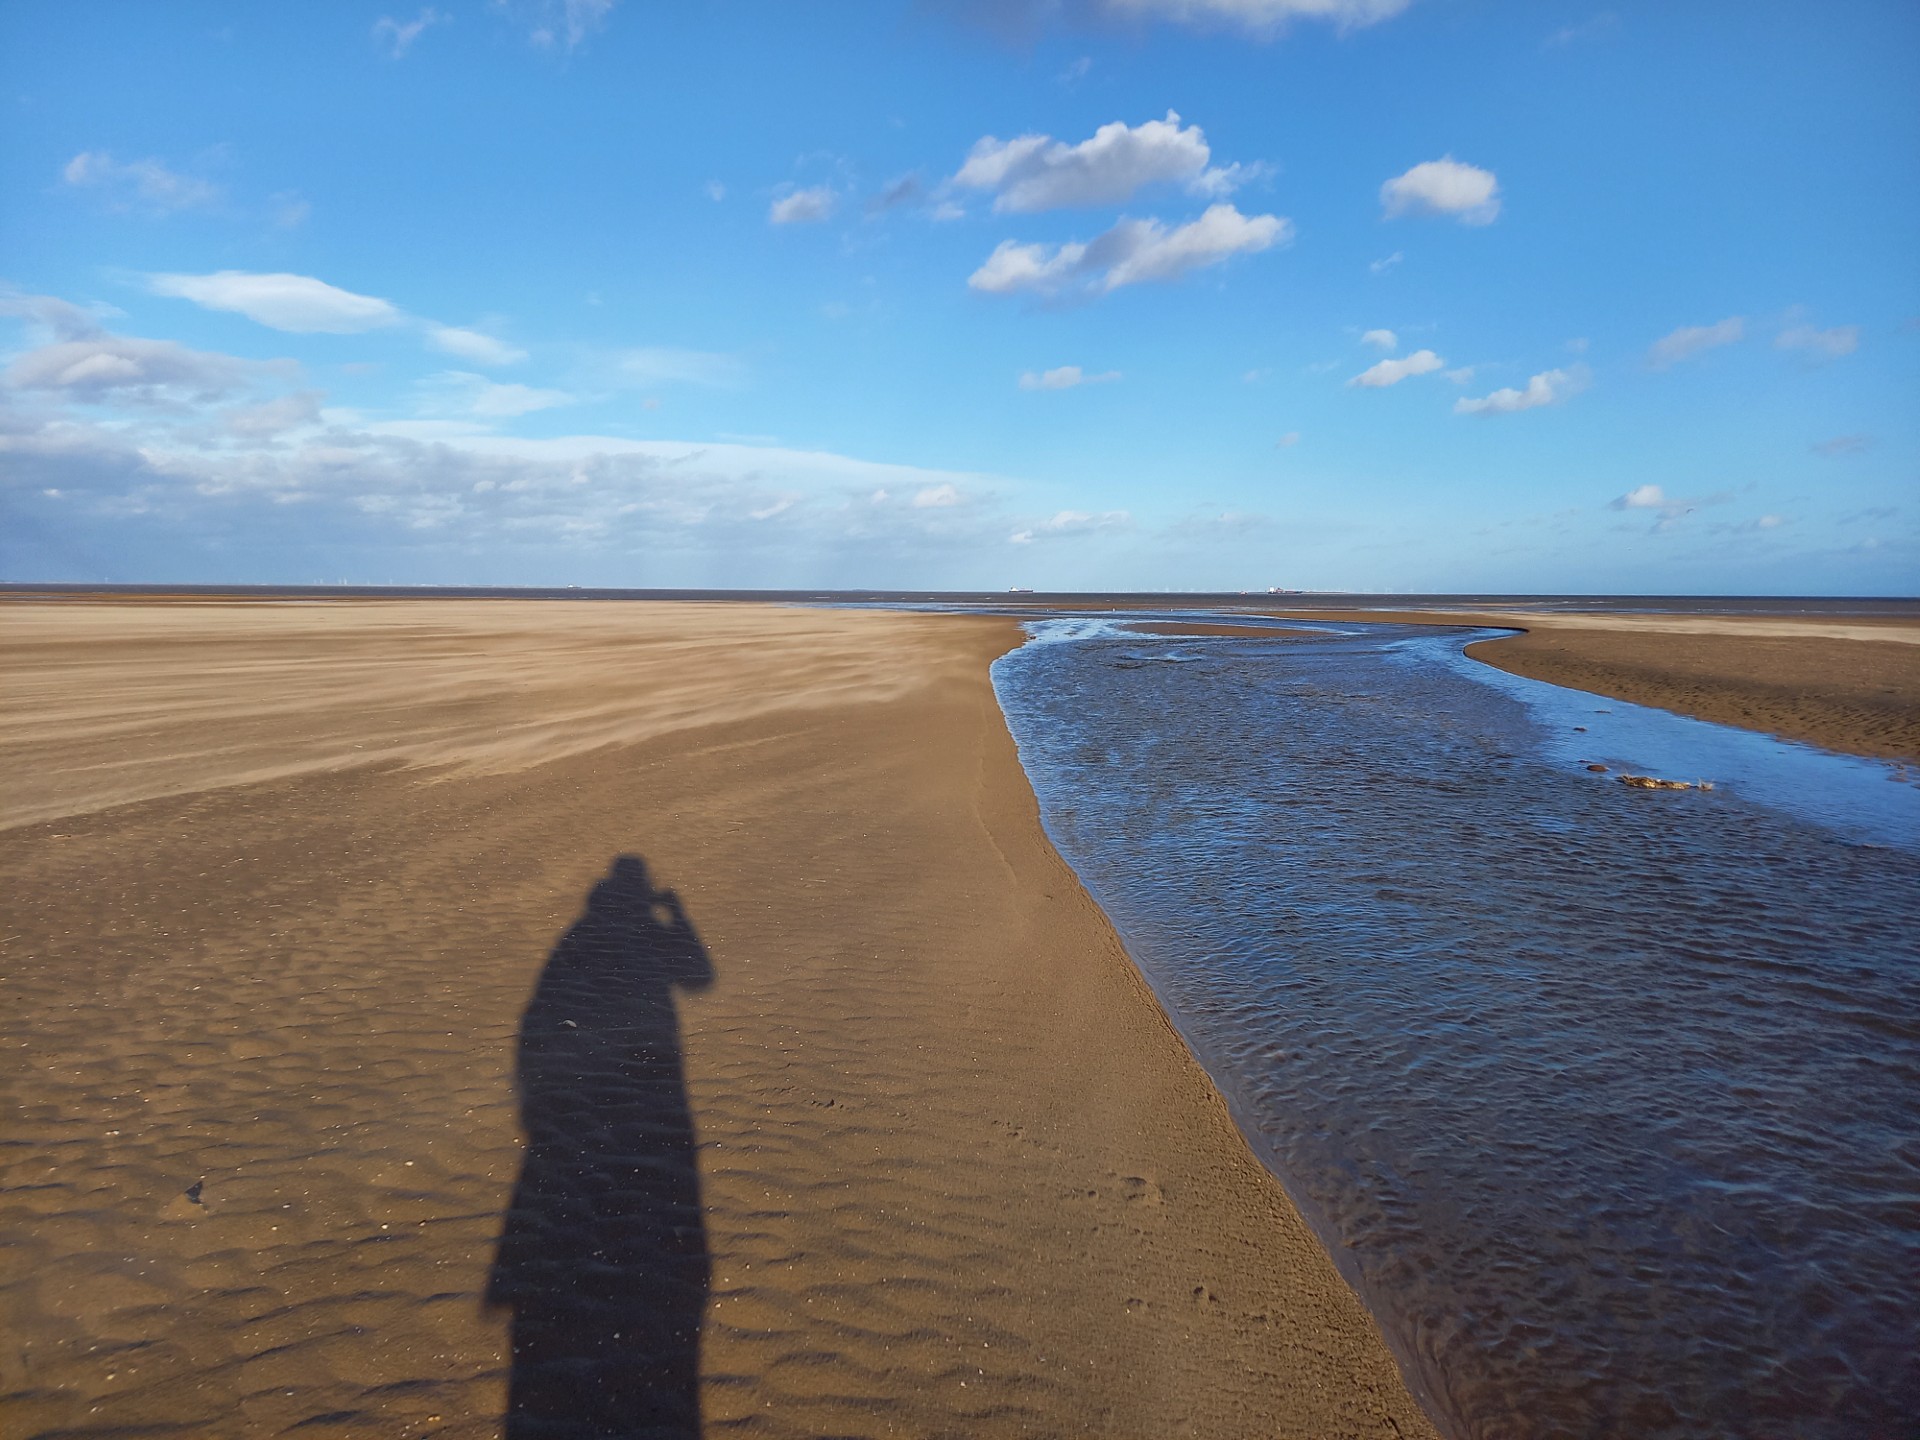 A beach with a person's shadow visible on the sand.